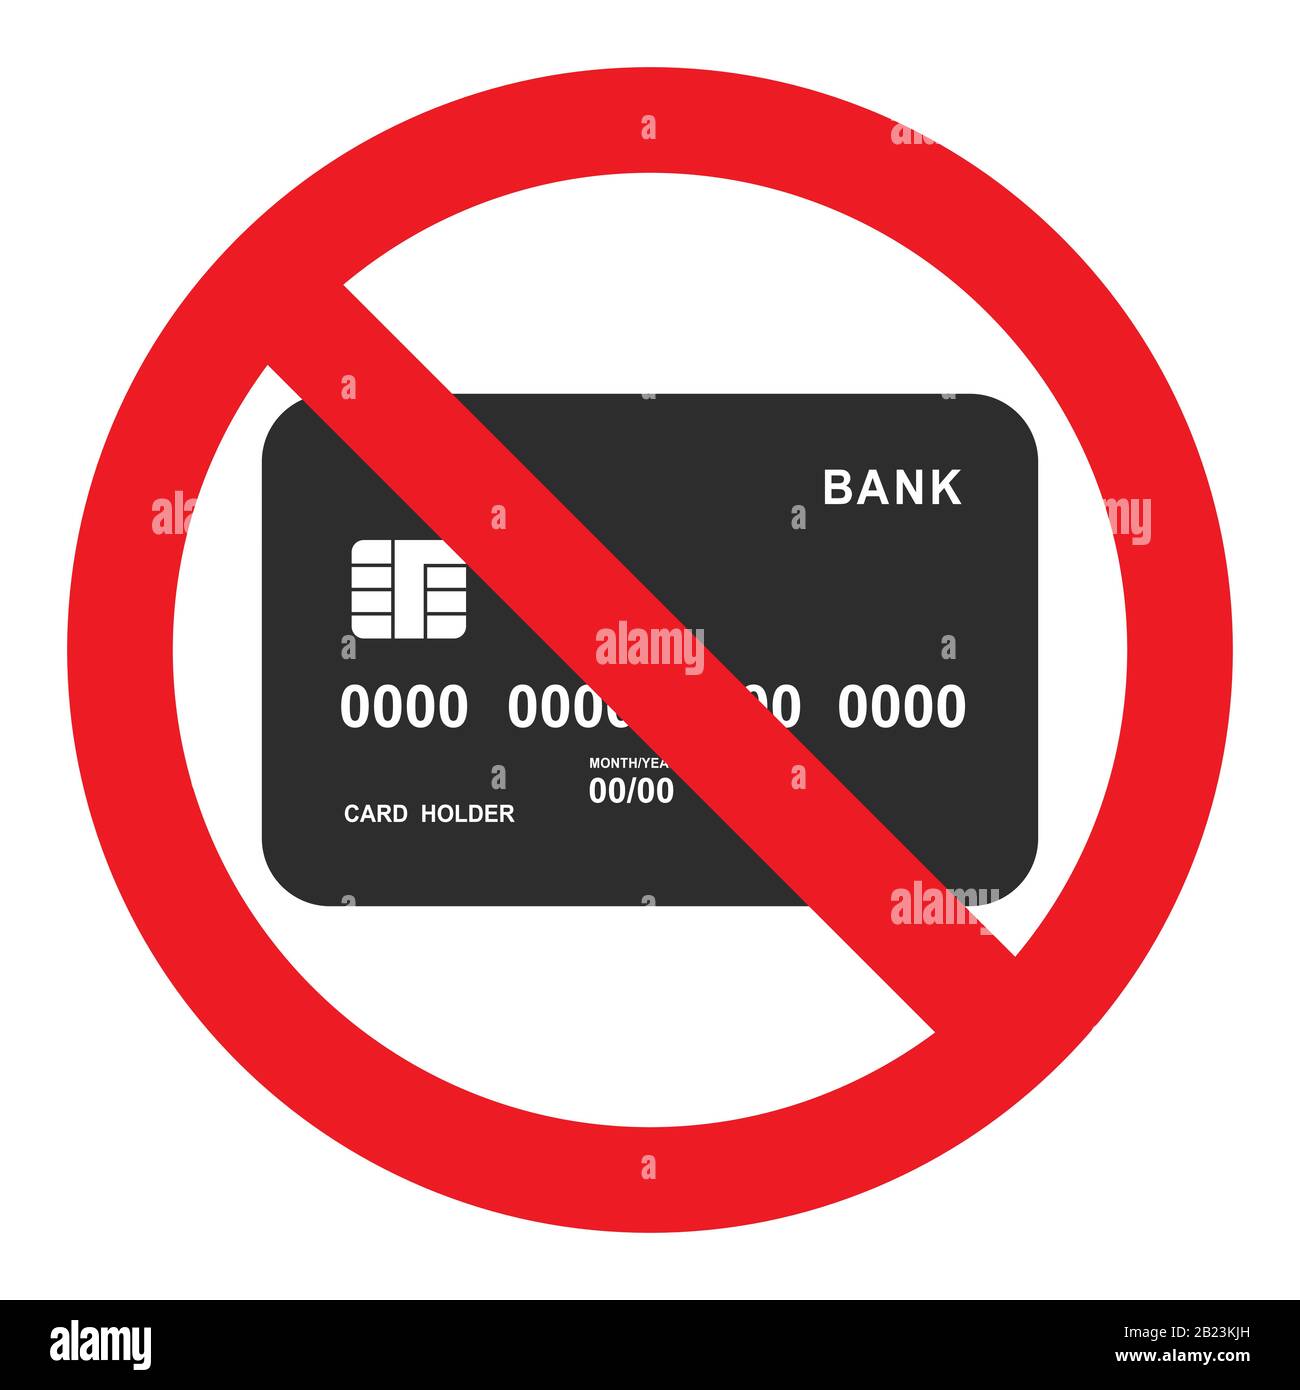 Bank card icon in red crossed out circle. No credit card. Cash. No credit cards accepted. Isolated vector illustration on white background. Stock Vector